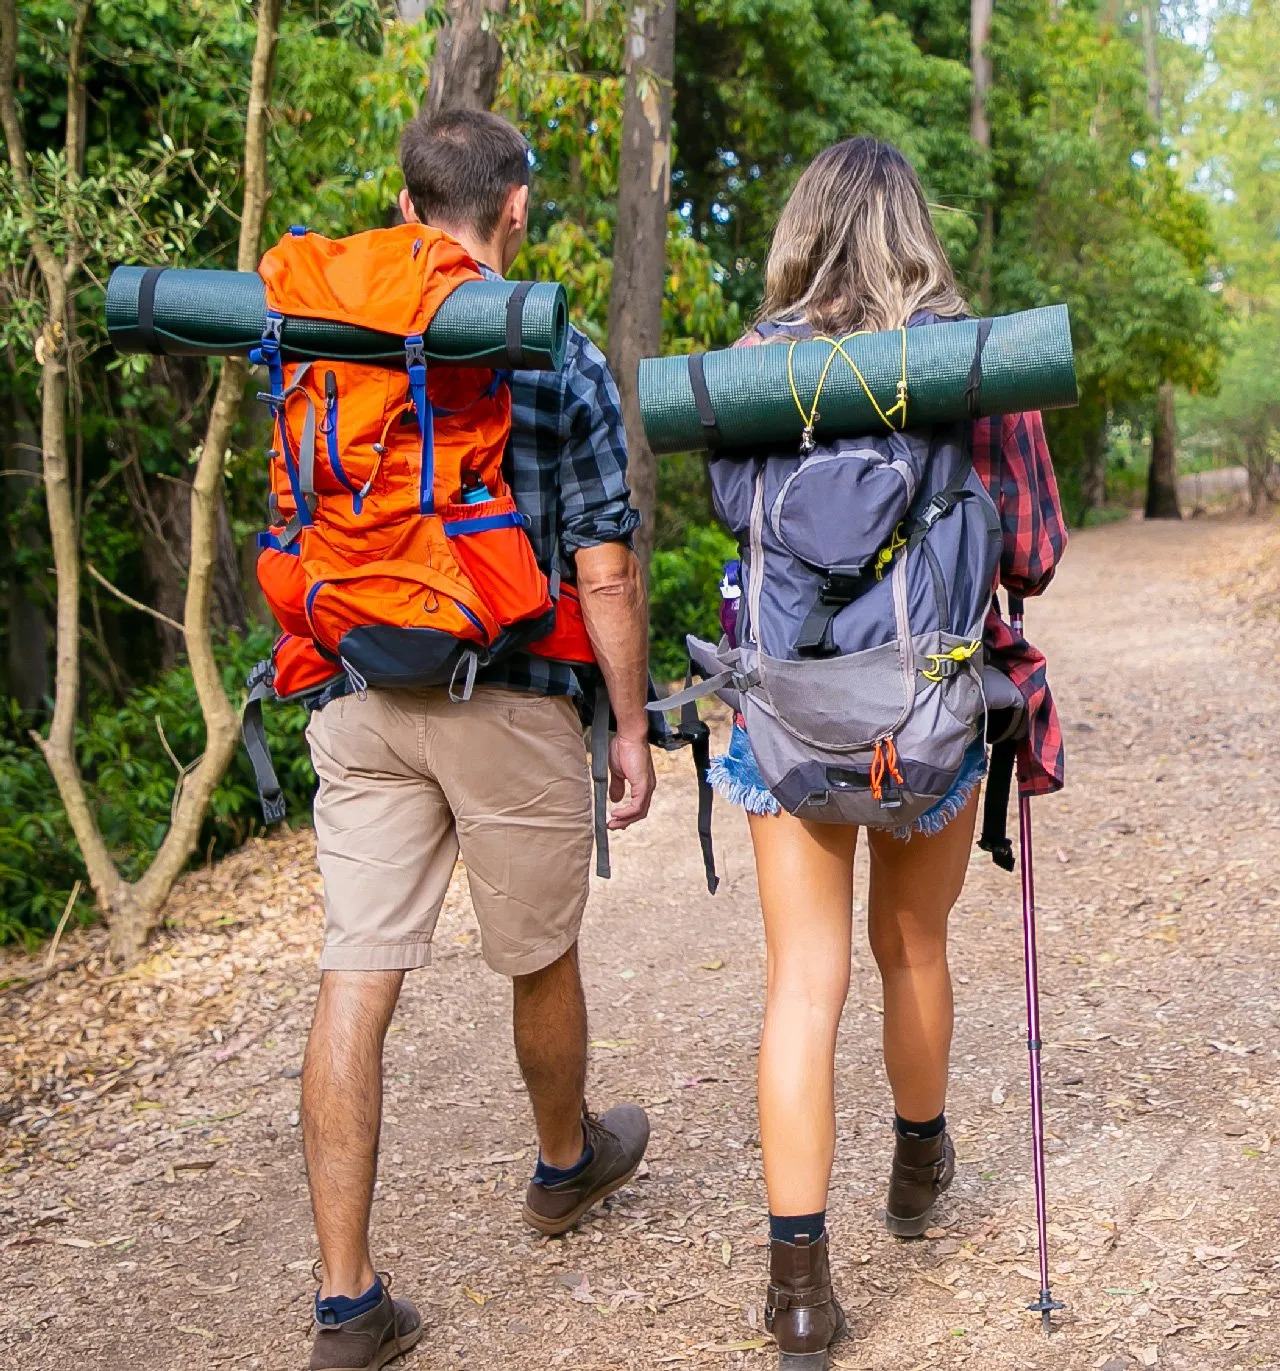 public/uploads/2022/07/back-view-couple-going-along-road-forest-long-haired-woman-man-carrying-backpacks-hiking-nature-toge.jpg